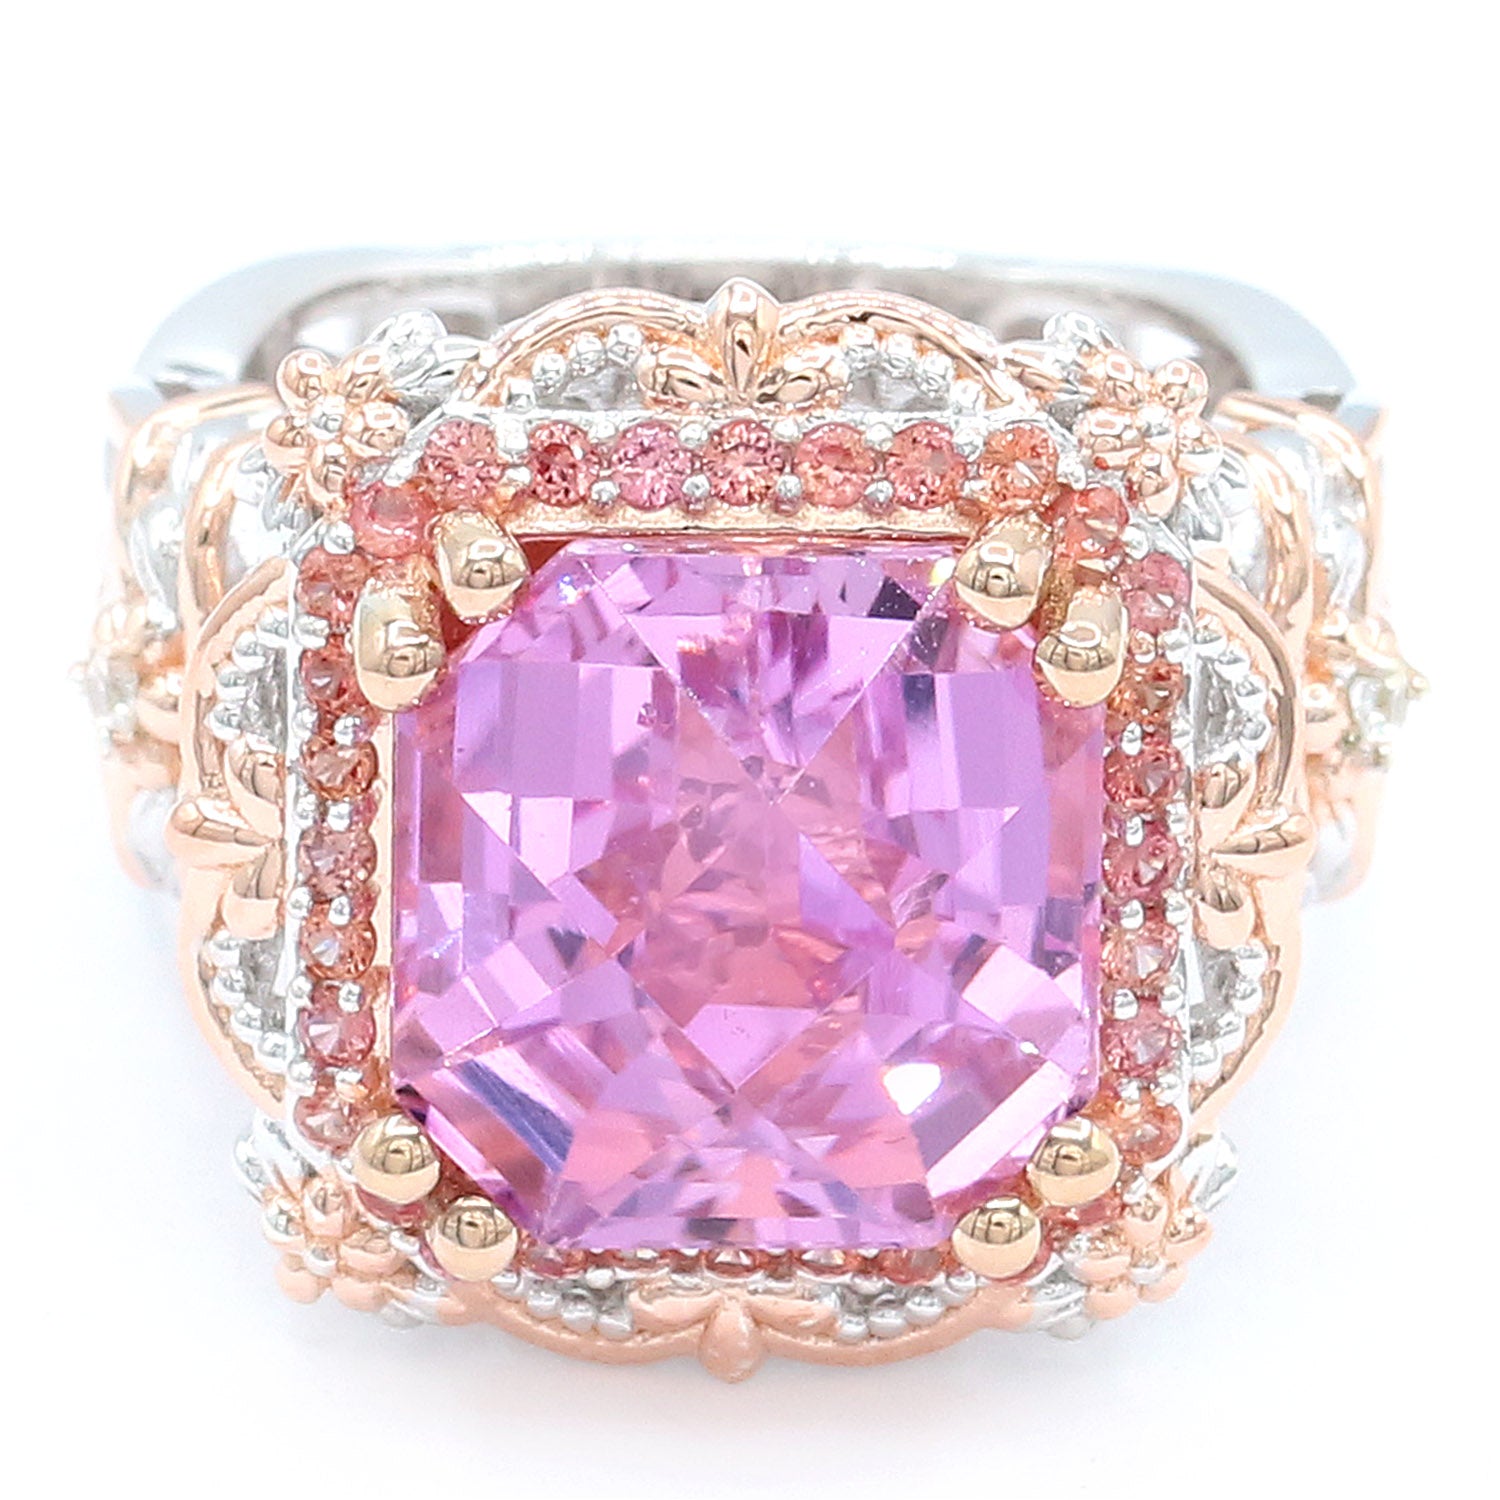 Limited Edition Gems en Vogue Luxe, One-of-a-Kind 13.91ctw Kunzite, Padparadscha Sapphire & White Zircon Ring